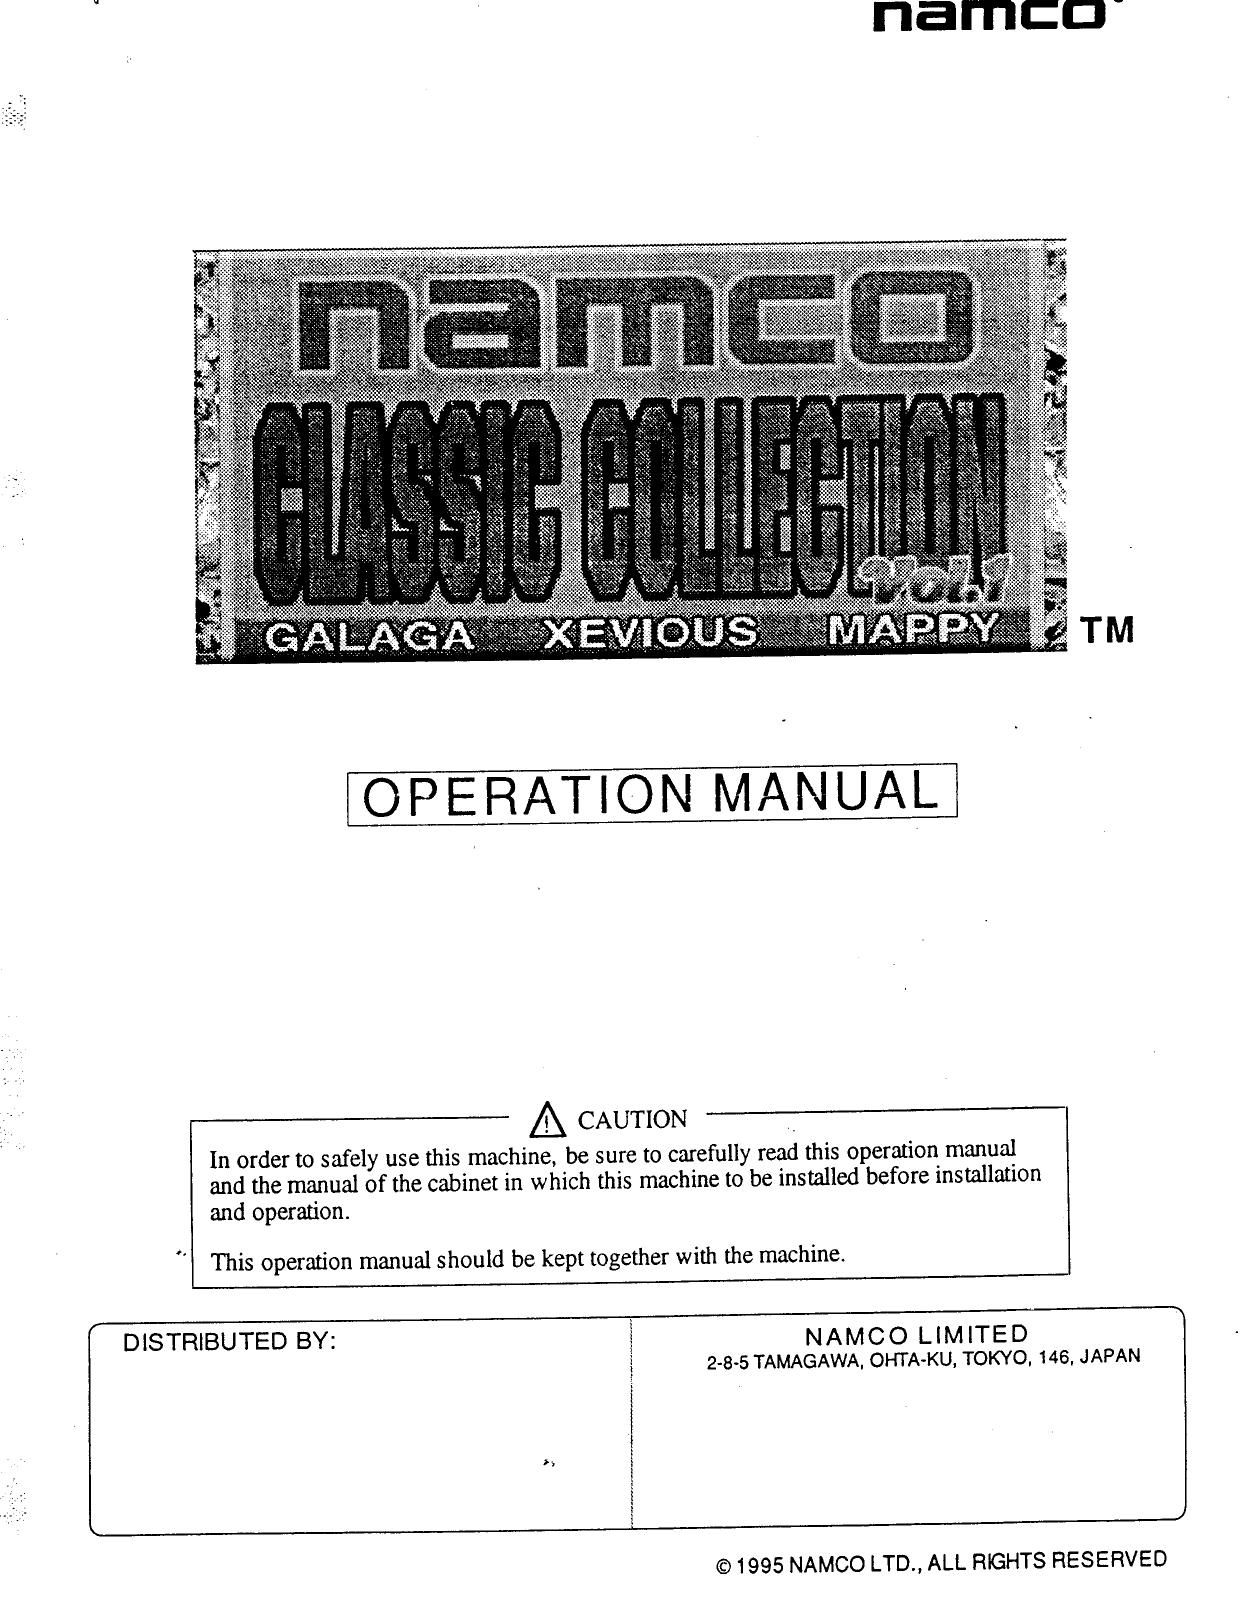 Namco Classic Collection Vol. 1 (Galaga-Xevious-Mappy) (Operation) (U)